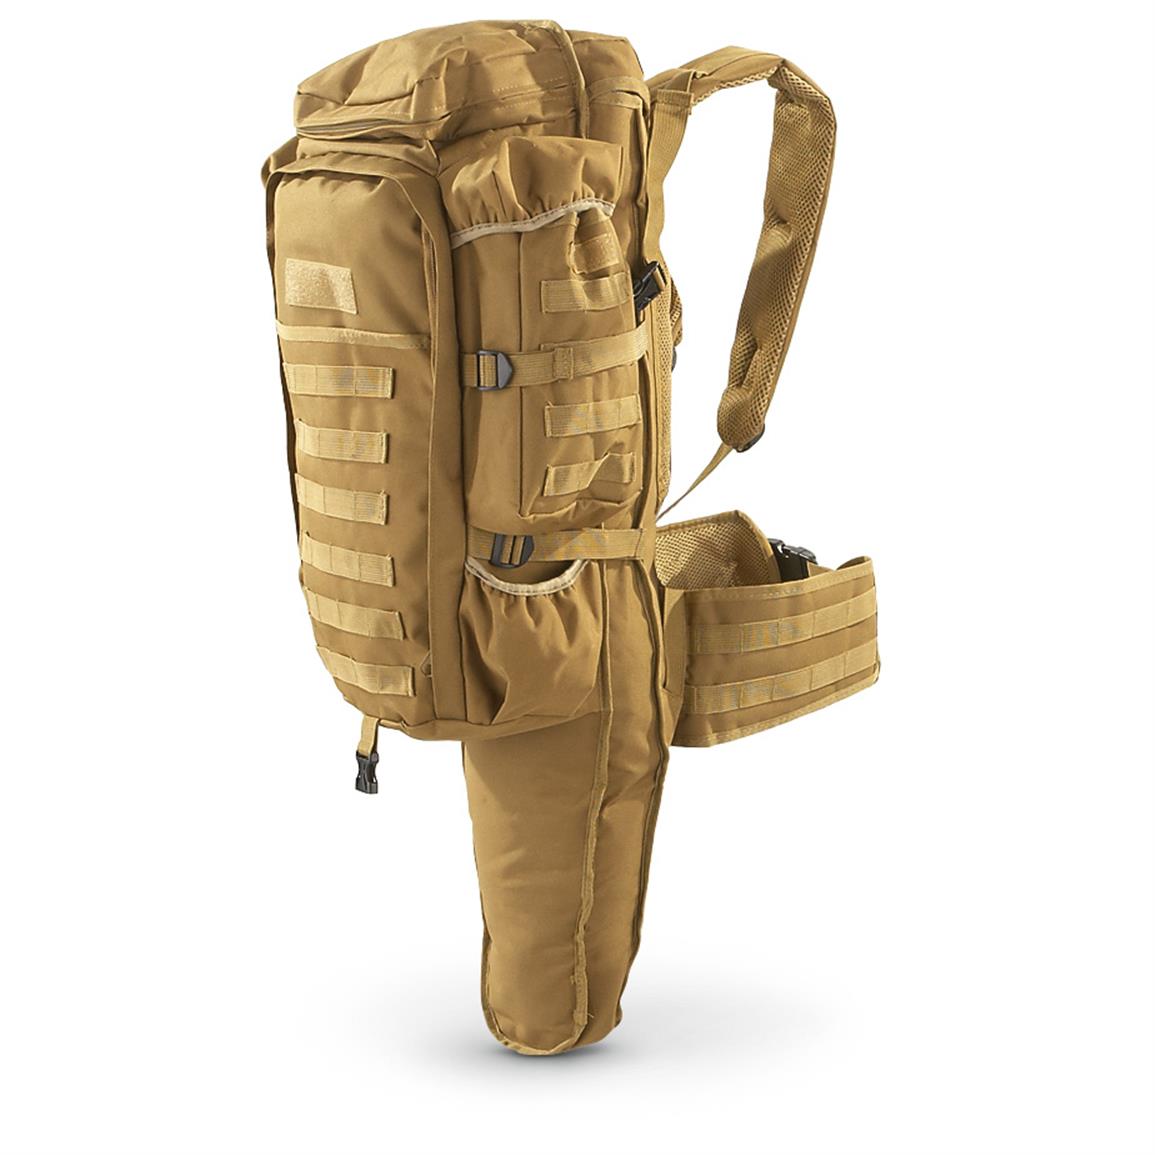 Cactus Jack Tactical Assault Bag with Rifle Holder, Coyote Tan